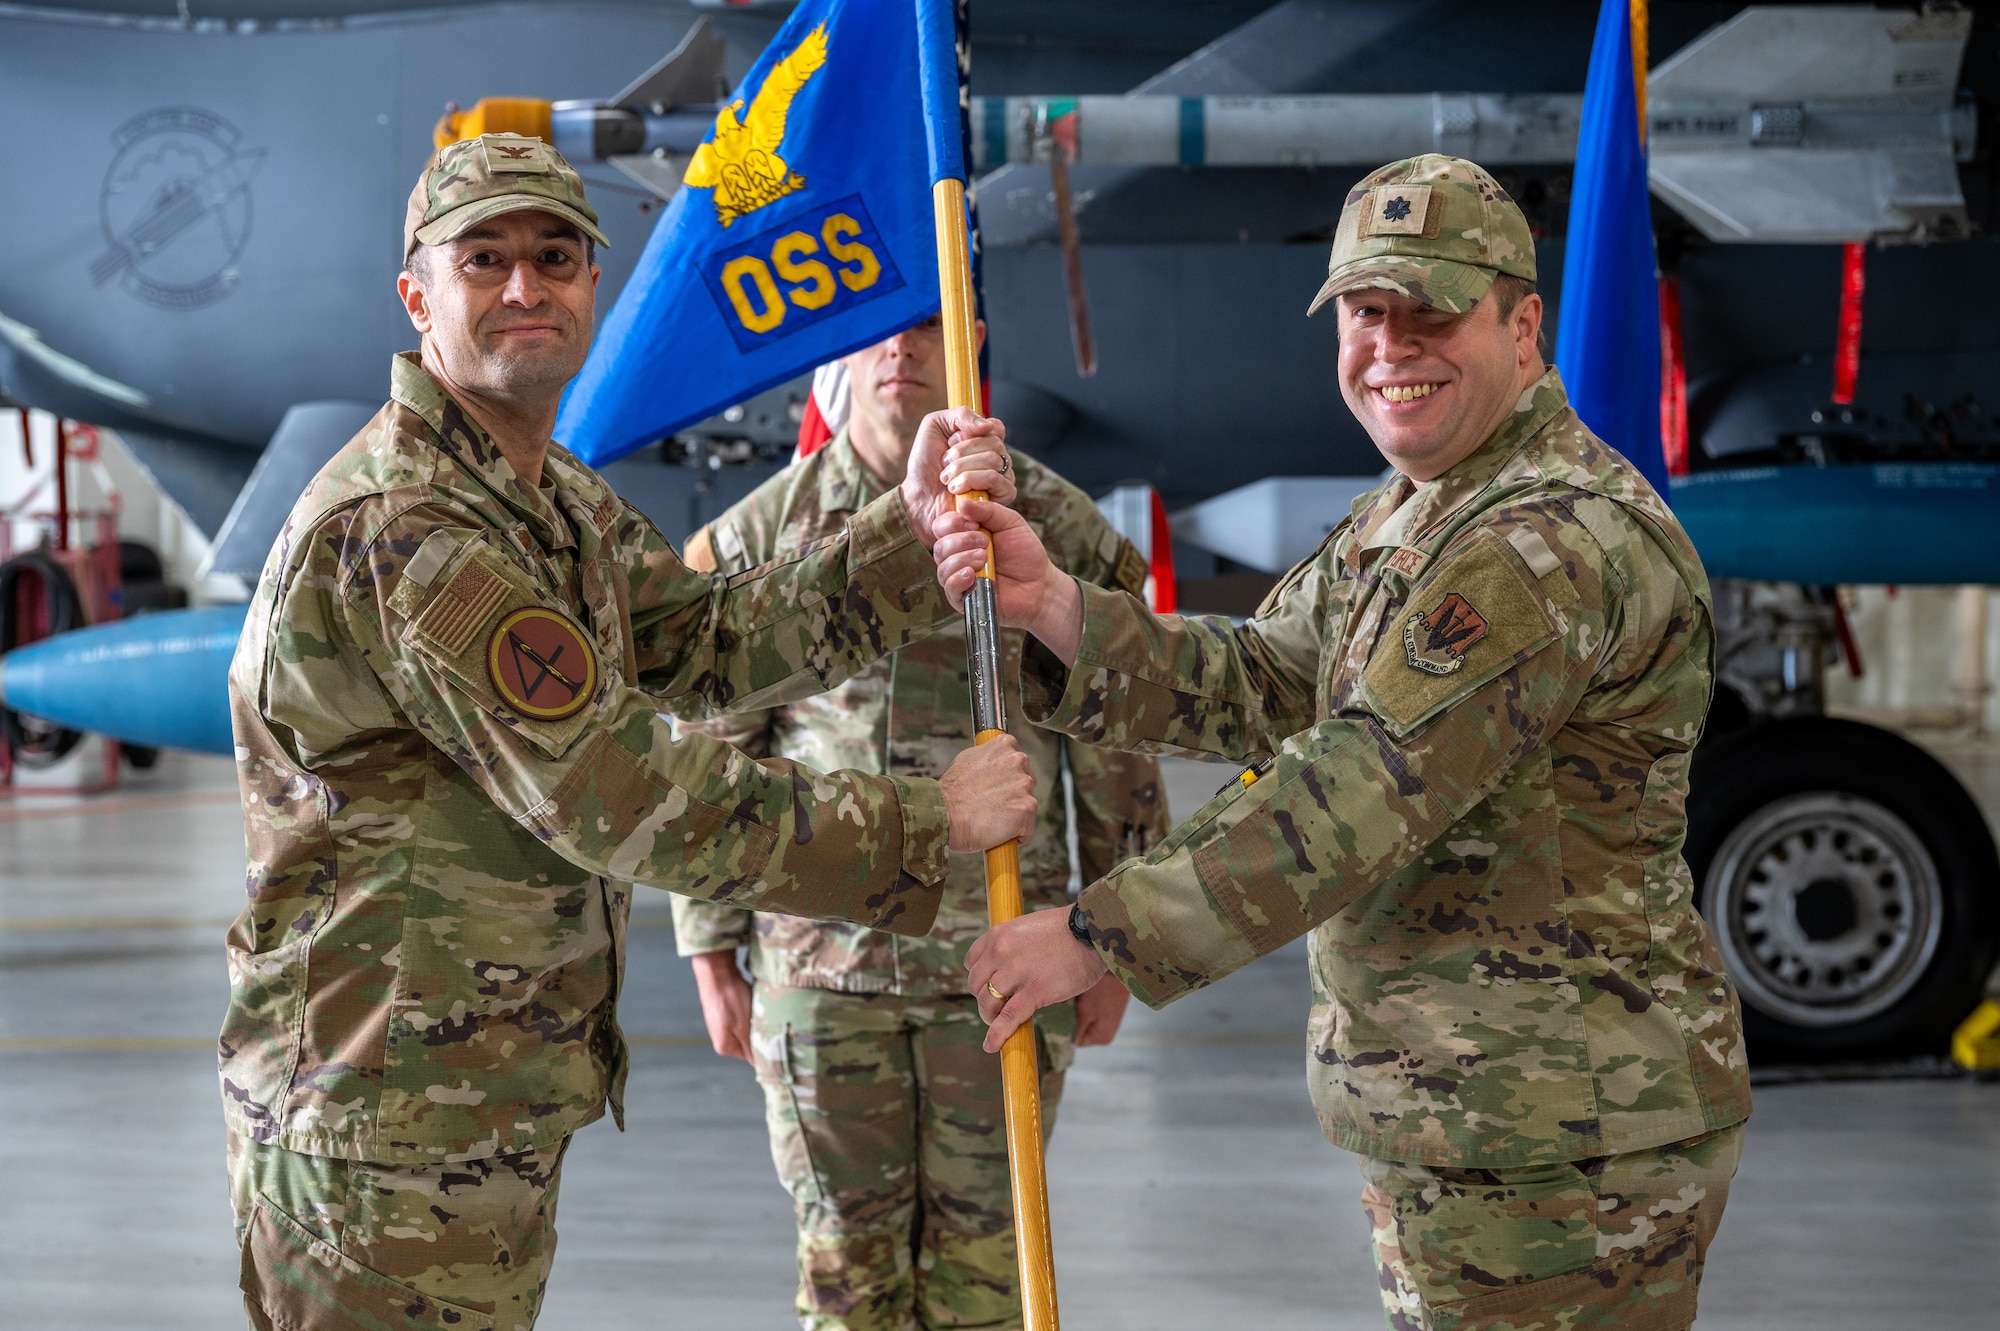 U.S. Air Force Col. Morgan Lohse, 4th Fighter Wing commander, appoints Lt. Col. Harry Starnes as the new commander of the 4th Operational Support Squadron during a change of command ceremony at Seymour Johnson Air Force Base, April 22, 2024. The passing of the guidon serves as tradition to represent the change in commanders for the squadron. (U.S. Air Force photo by Airman 1st Class Leighton Lucero)